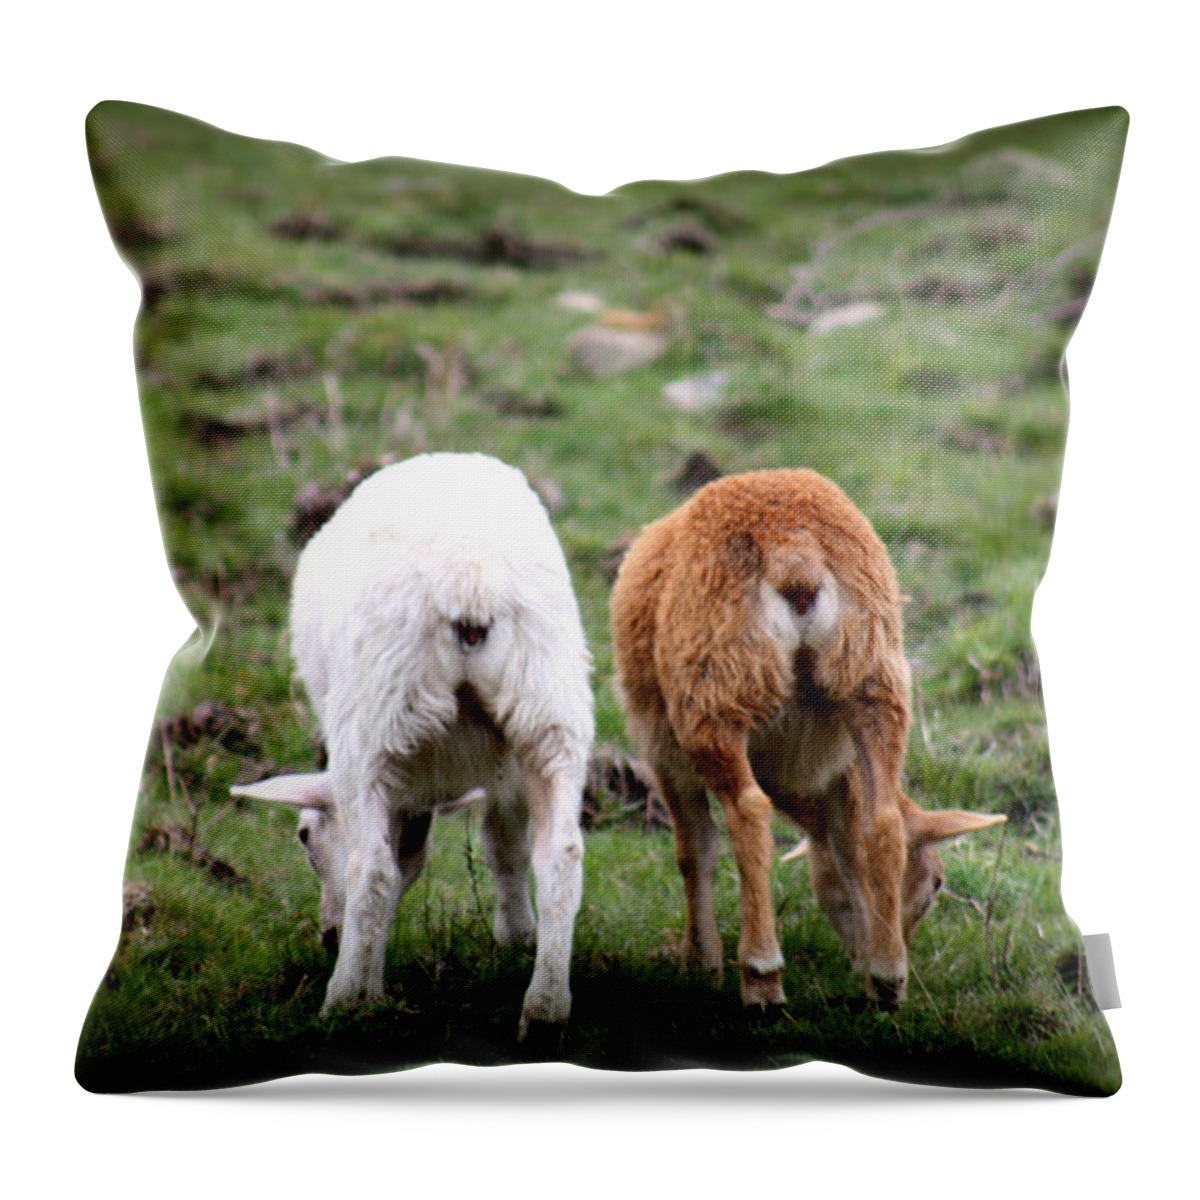 Baby Lambs Throw Pillow featuring the photograph Baby Side By Side Love by Kim Galluzzo Wozniak